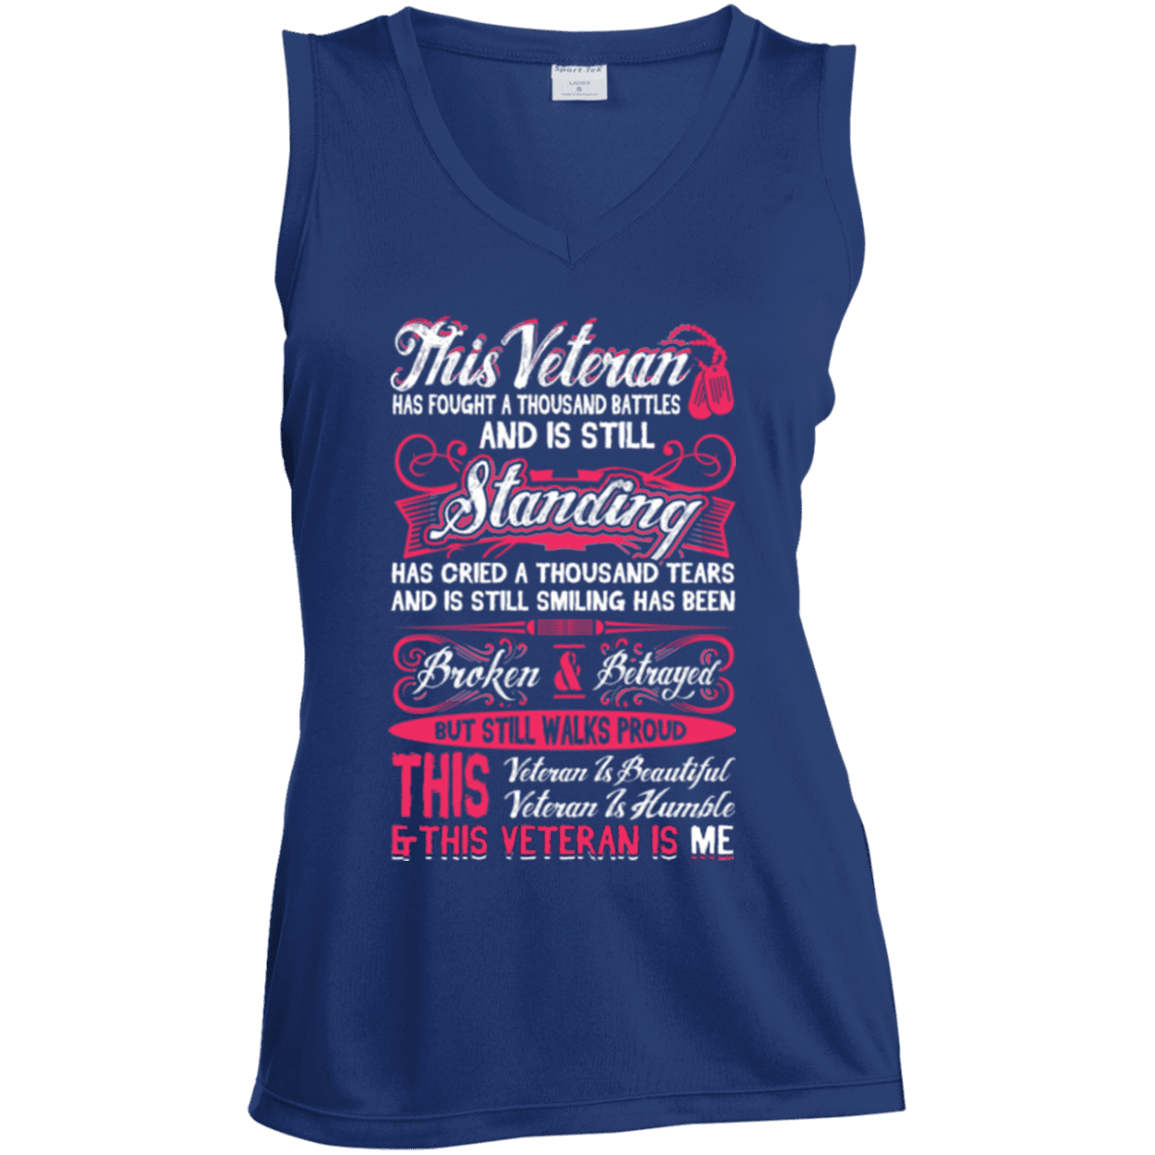 Military T-Shirt "This Veteran is Beautiful and Humble Women" Front-TShirt-General-Veterans Nation